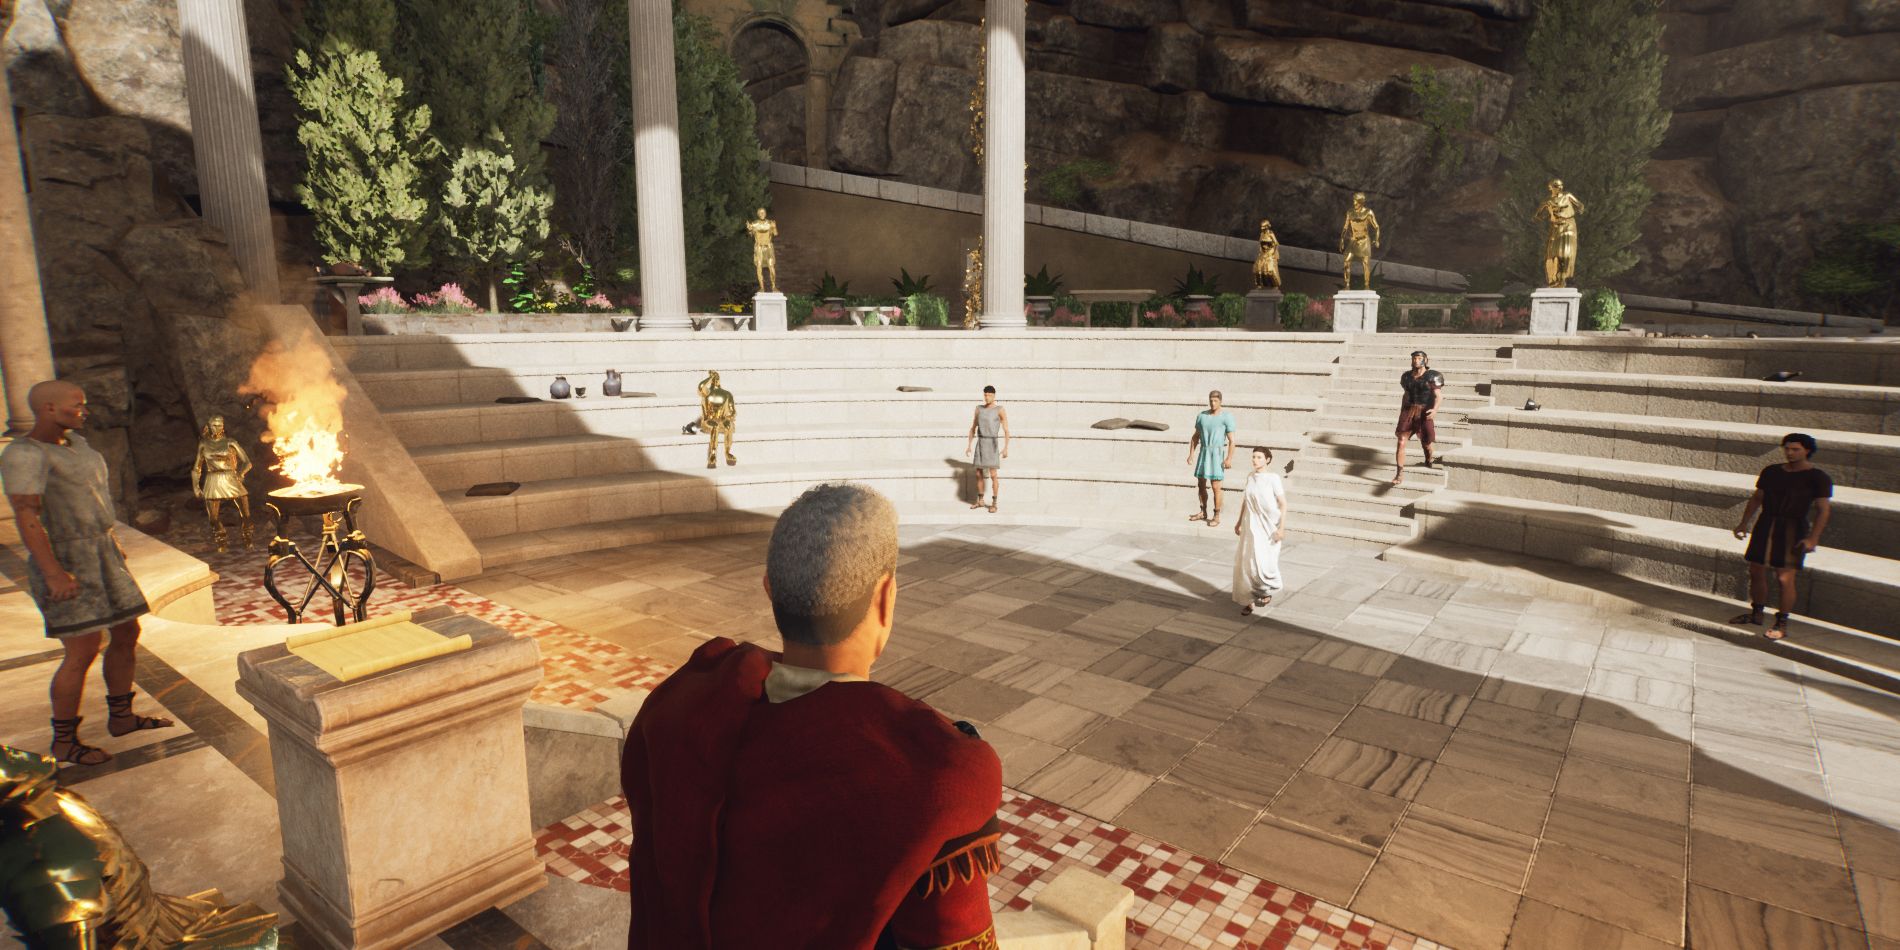 Electing a new leader in a roman forum in The Forgotten City